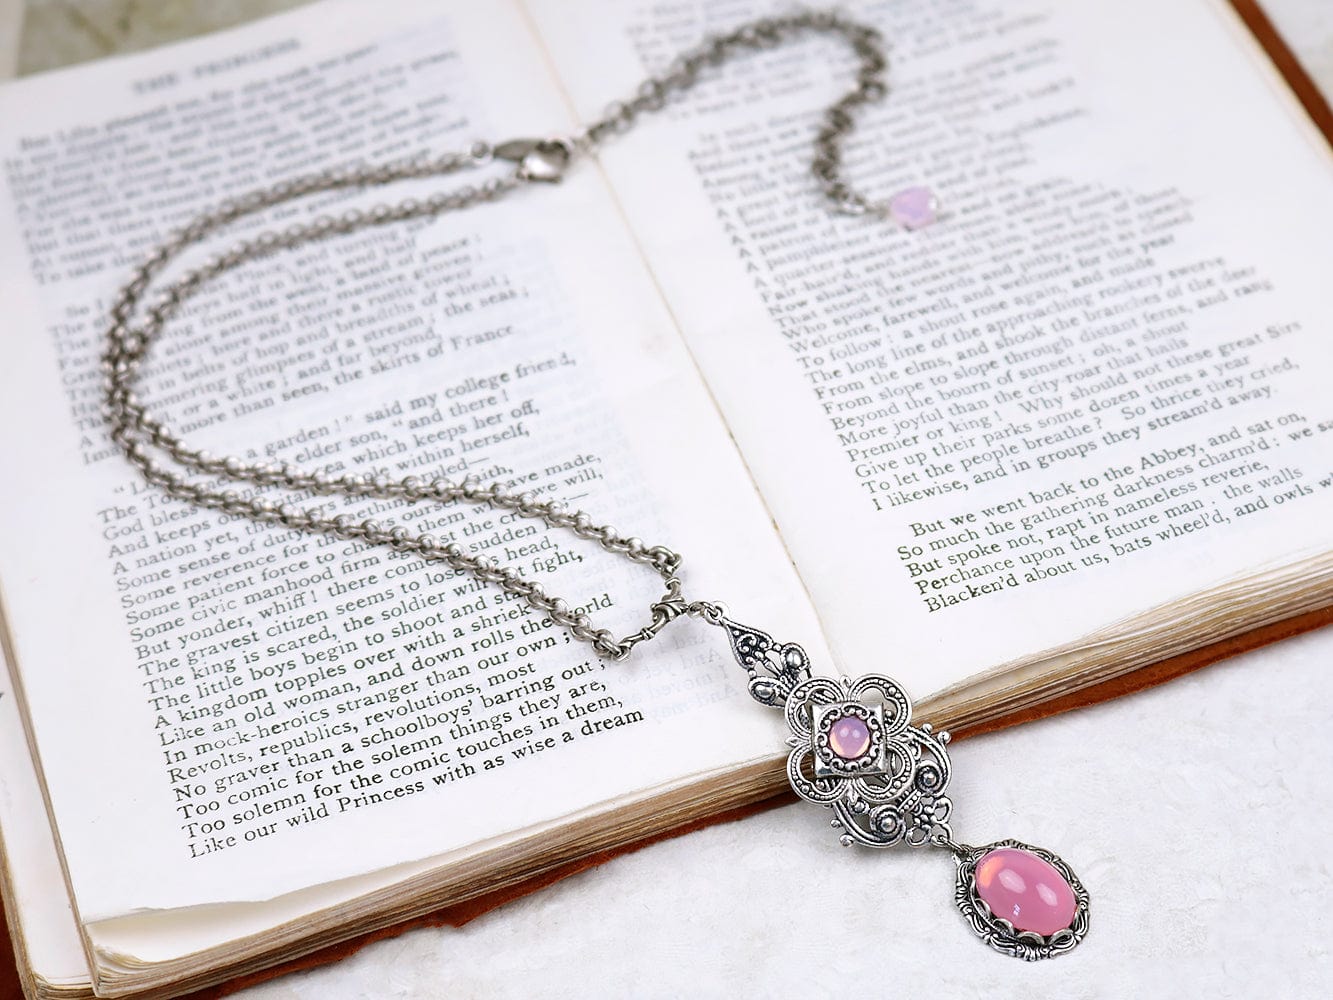 Avalon Pendant Necklace in Cherry Blossom Opal and Antiqued Silver by Rabbitwood and Reason